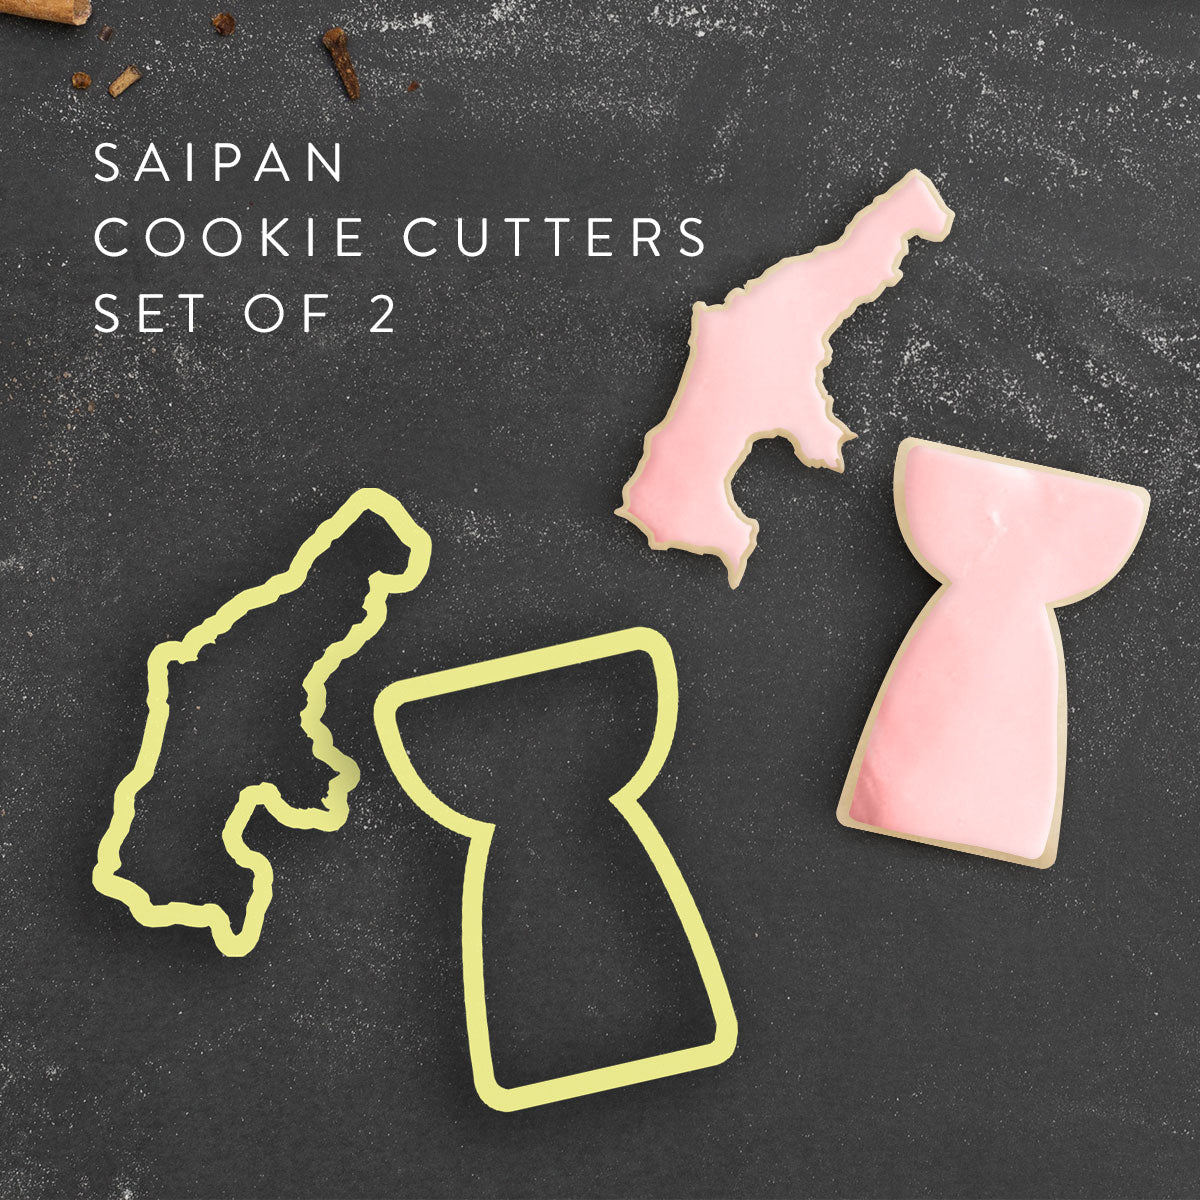 Saipan Latte Stone Set of 2 Cookie Cutters - Ready to Ship